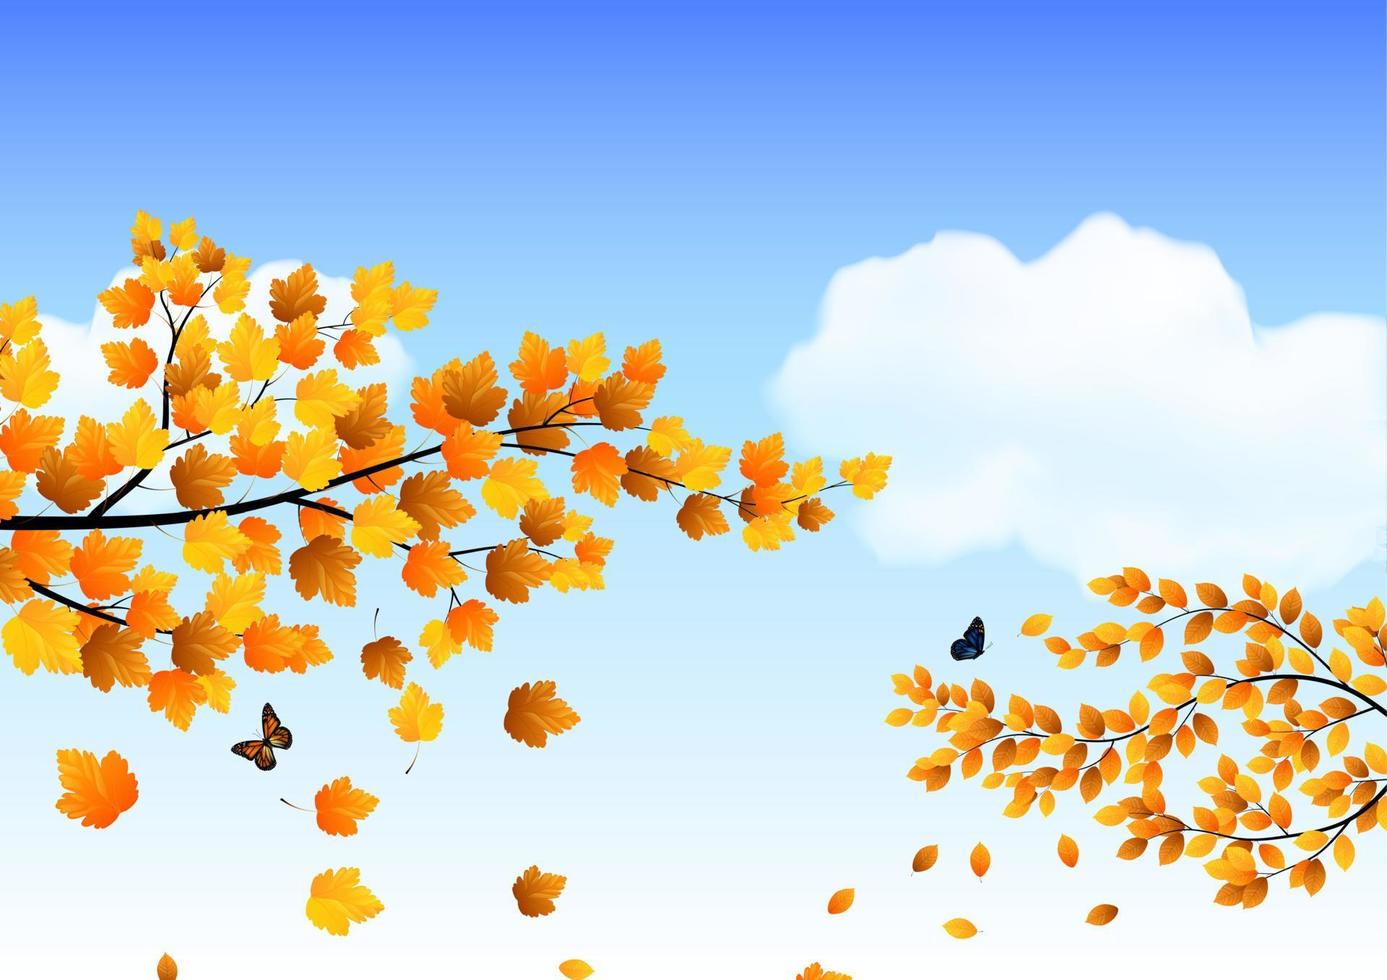 Autumn leaves against a background of blue sky vector